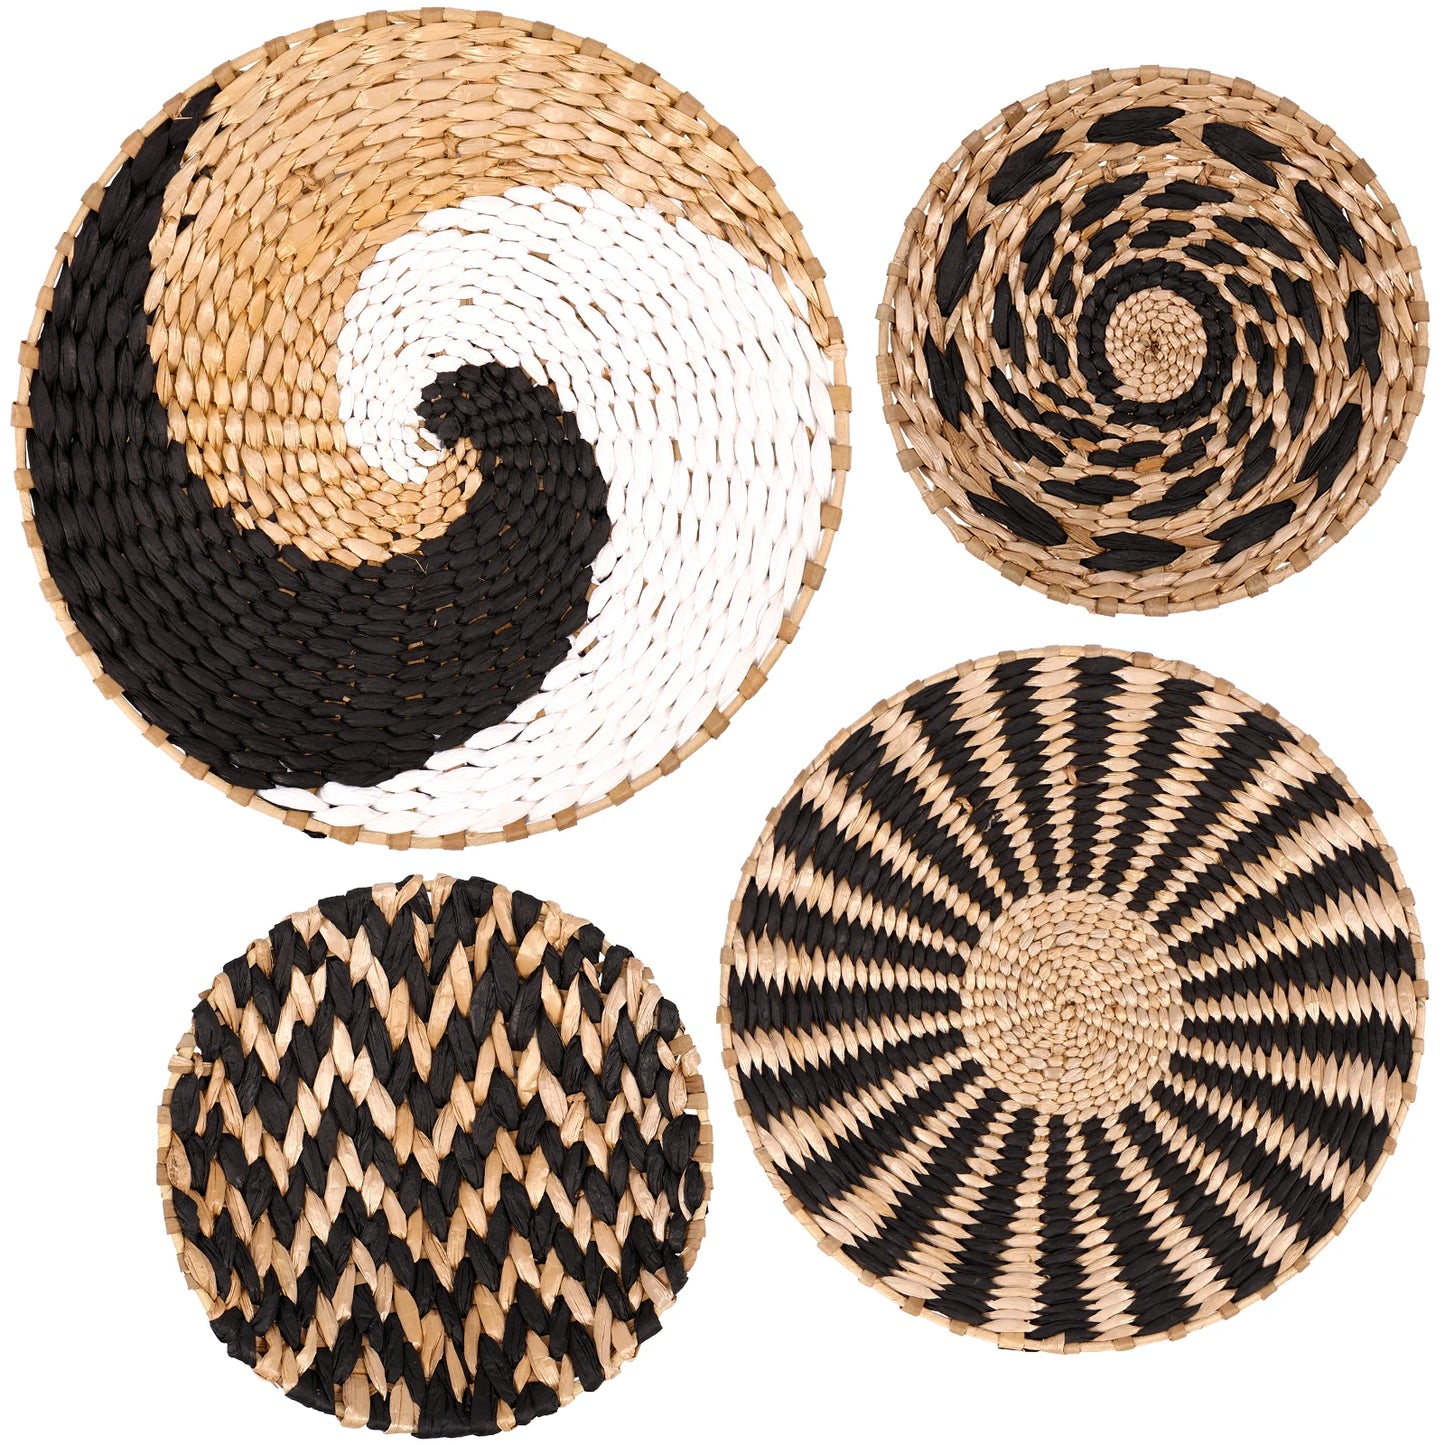 4Pcs Hanging Woven Wall Basket Set - Handcrafted Cattail Grass Baskets for Farmhouse Wall Decor